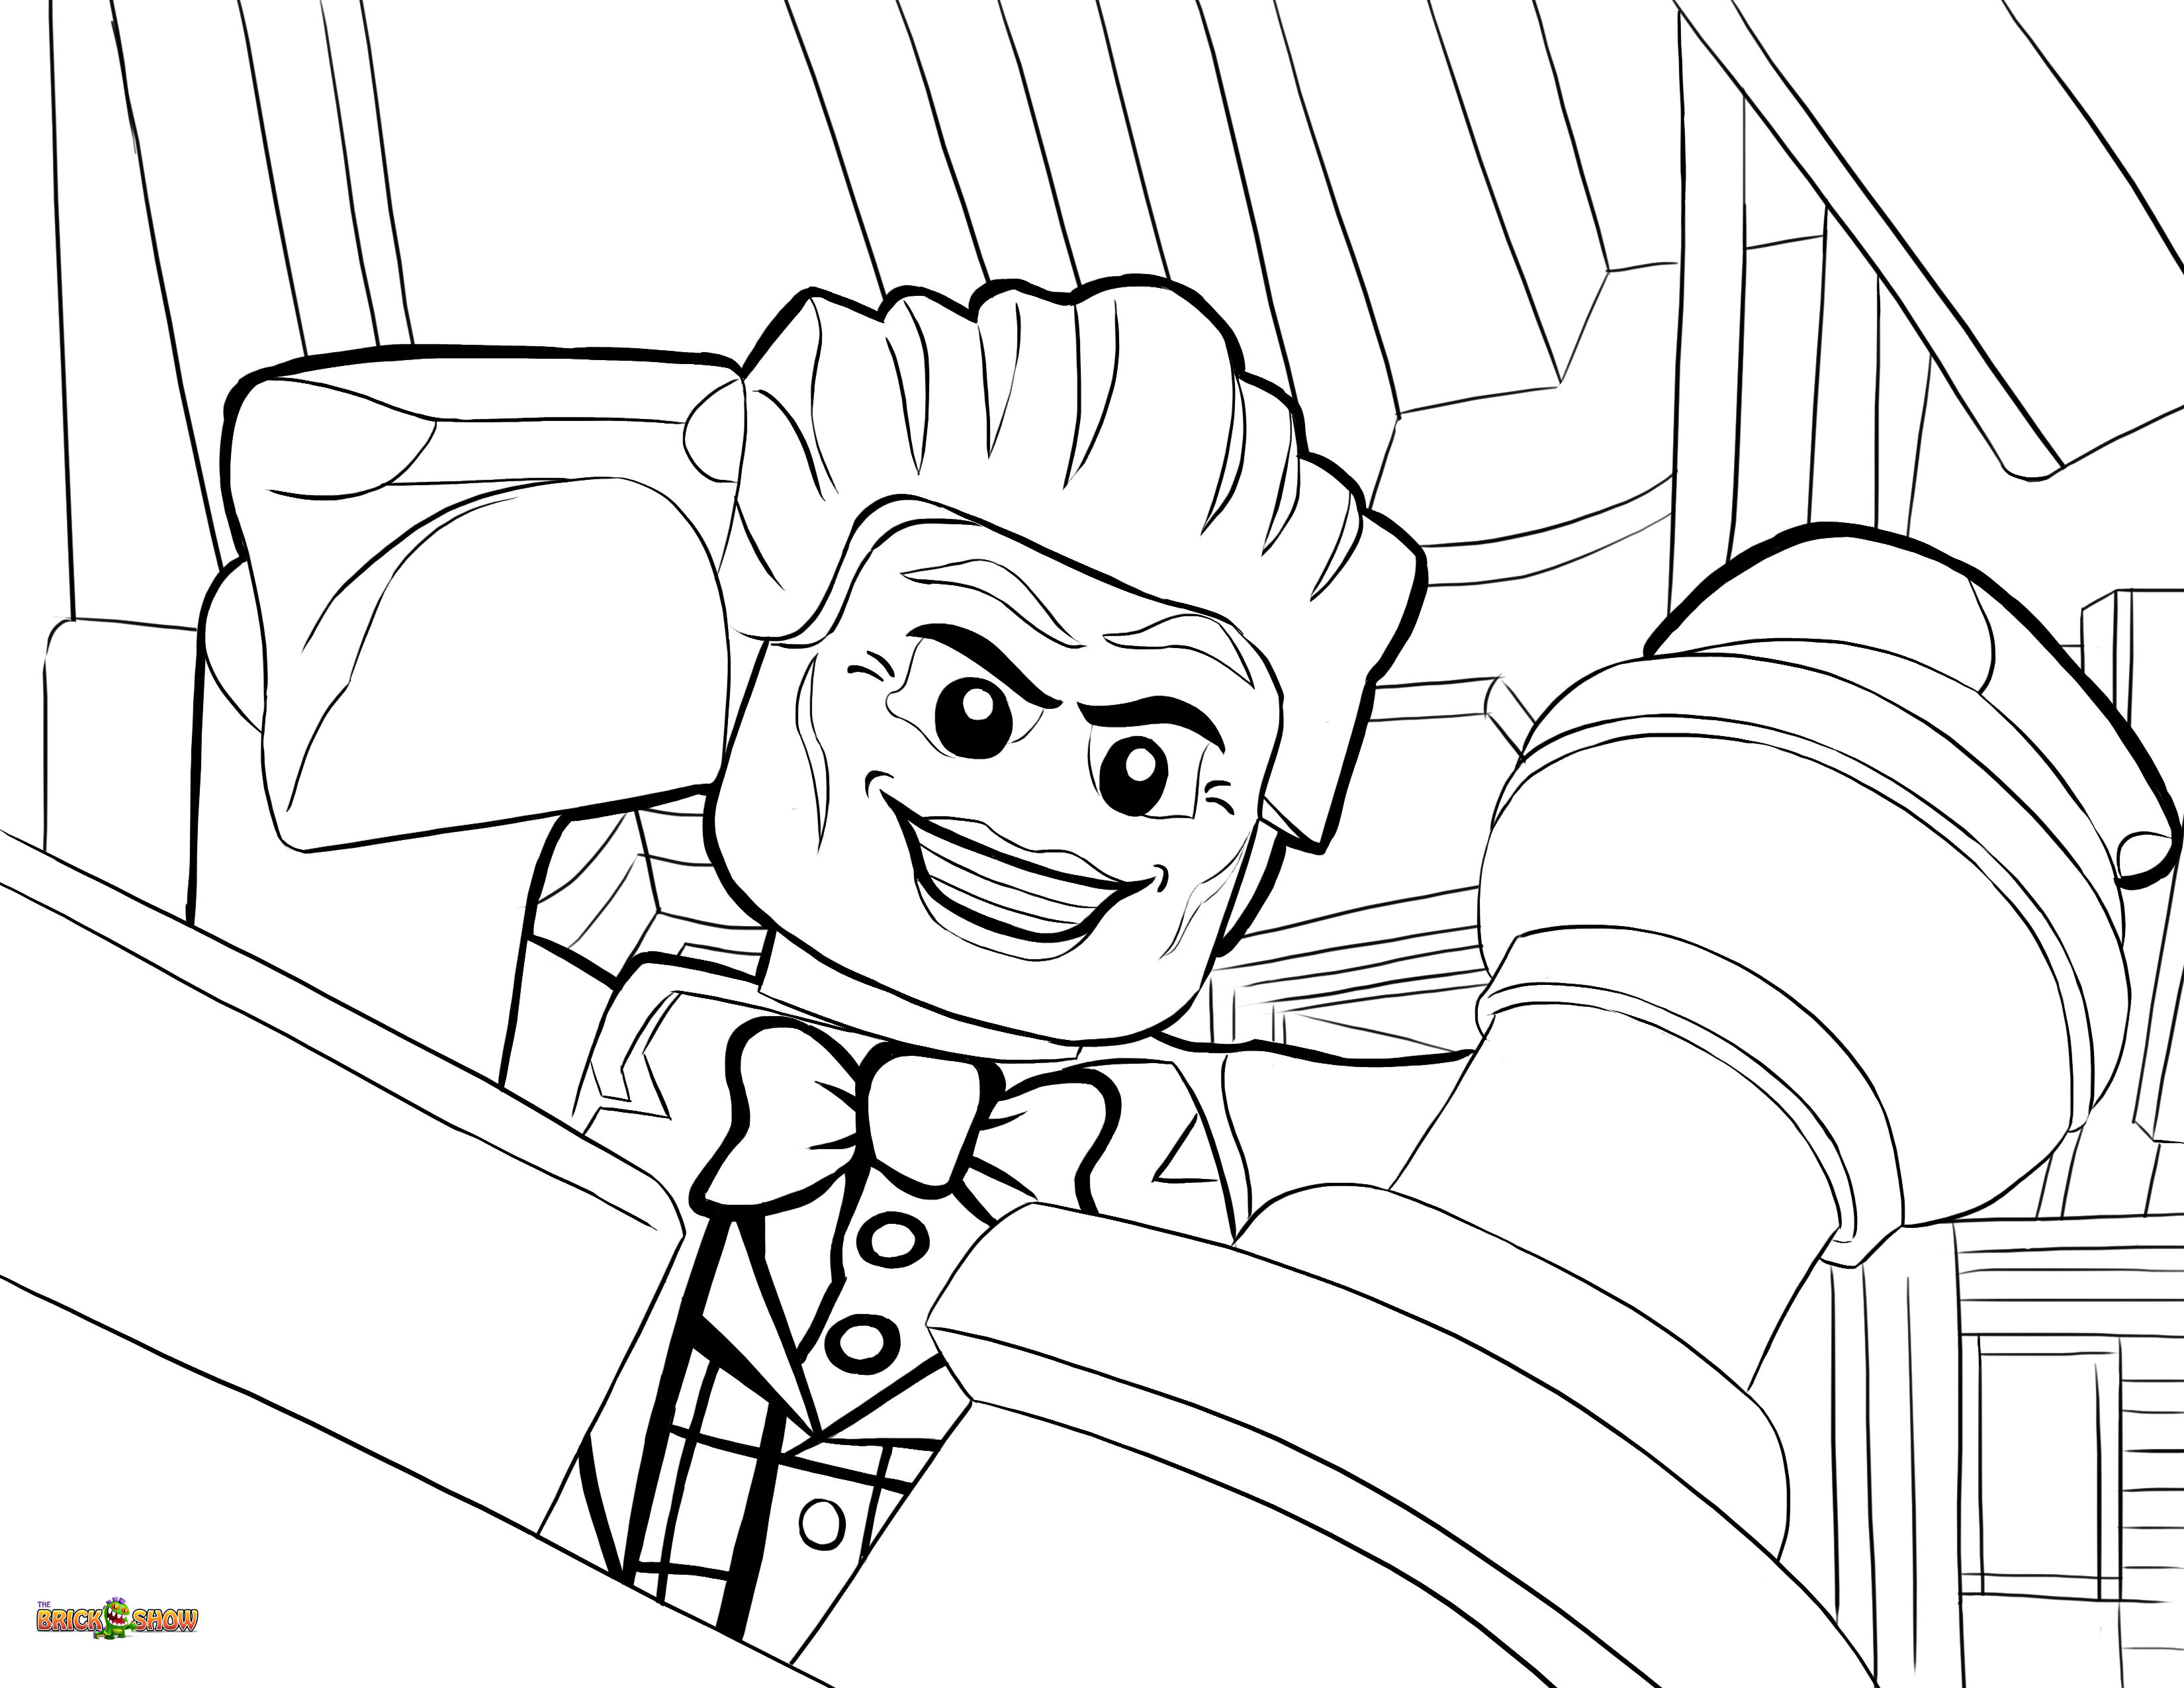 lego-coloring-pages-printable-free-printable-templates